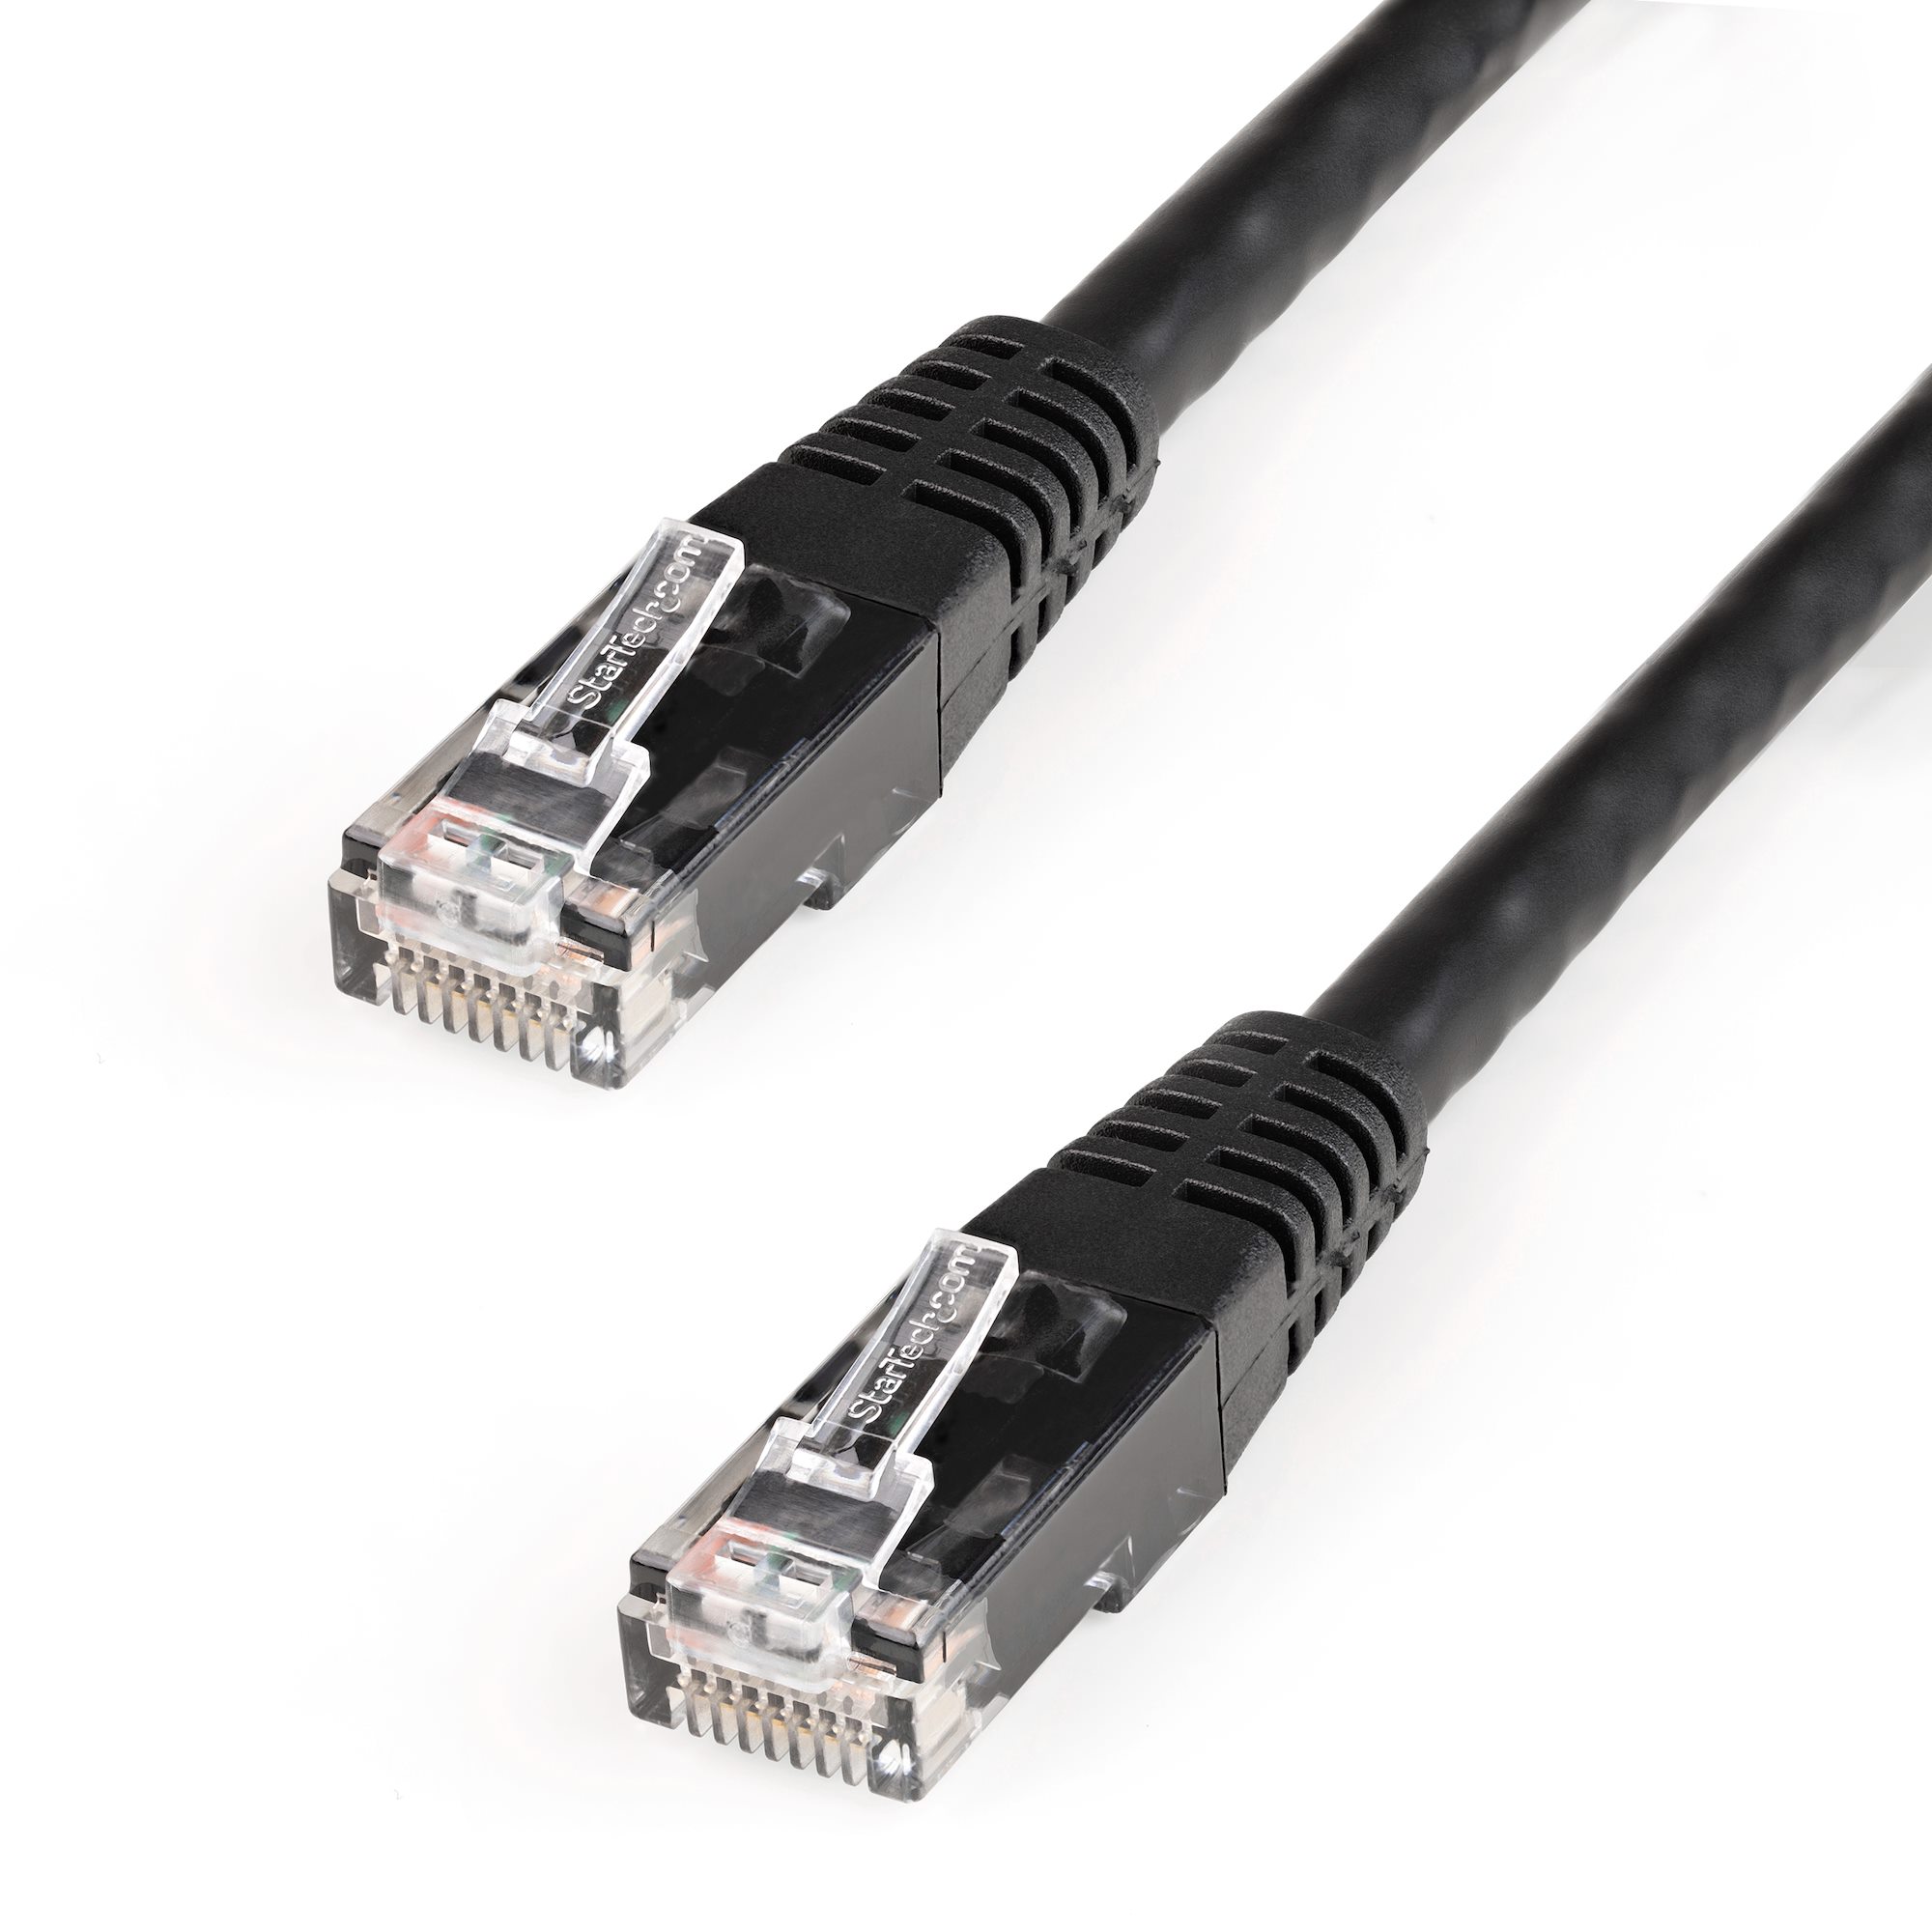 Internet Cable 6 ft RJ45 Black Patch LAN 10 Pack utp Cat 6 Cat6 Ethernet Cable 6 Feet Network Cord 